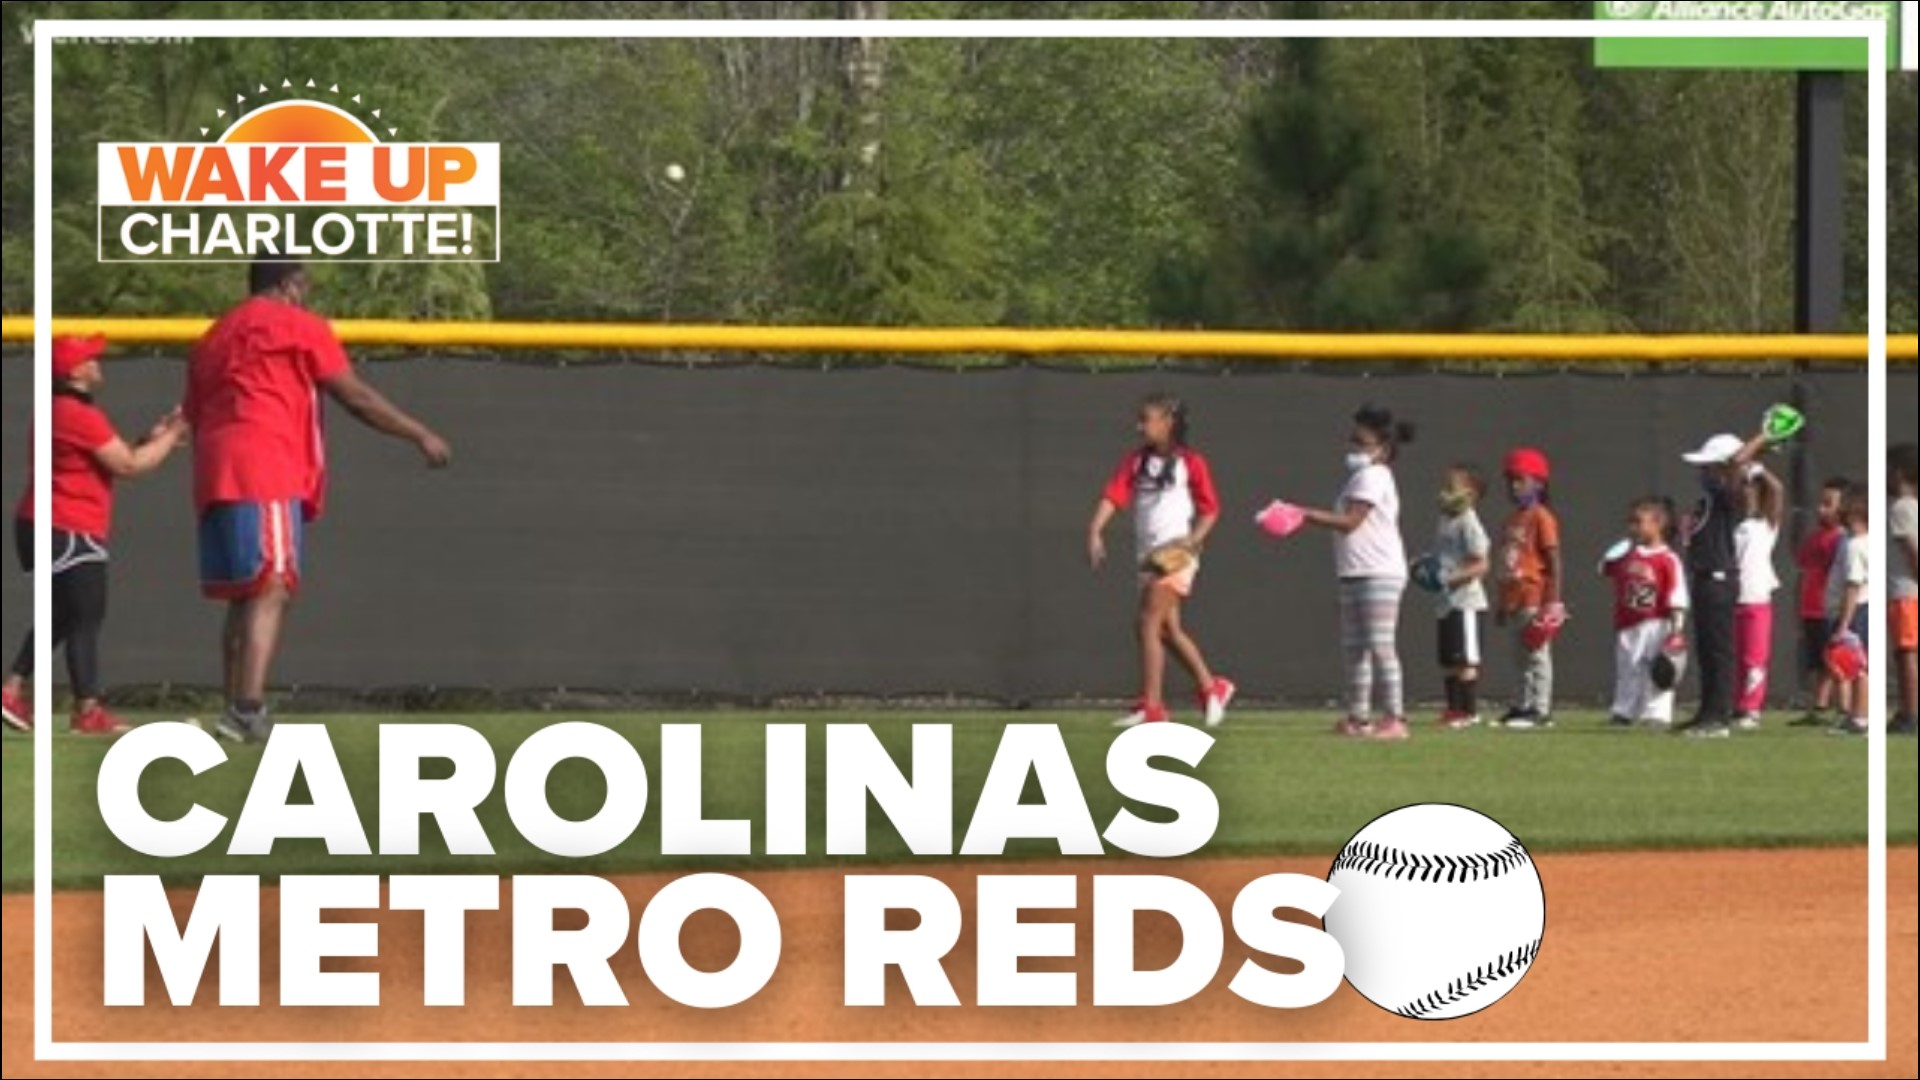 All this month, we are working to support Carolinas Metro Reds, a nonprofit that helps underserved kids play baseball.